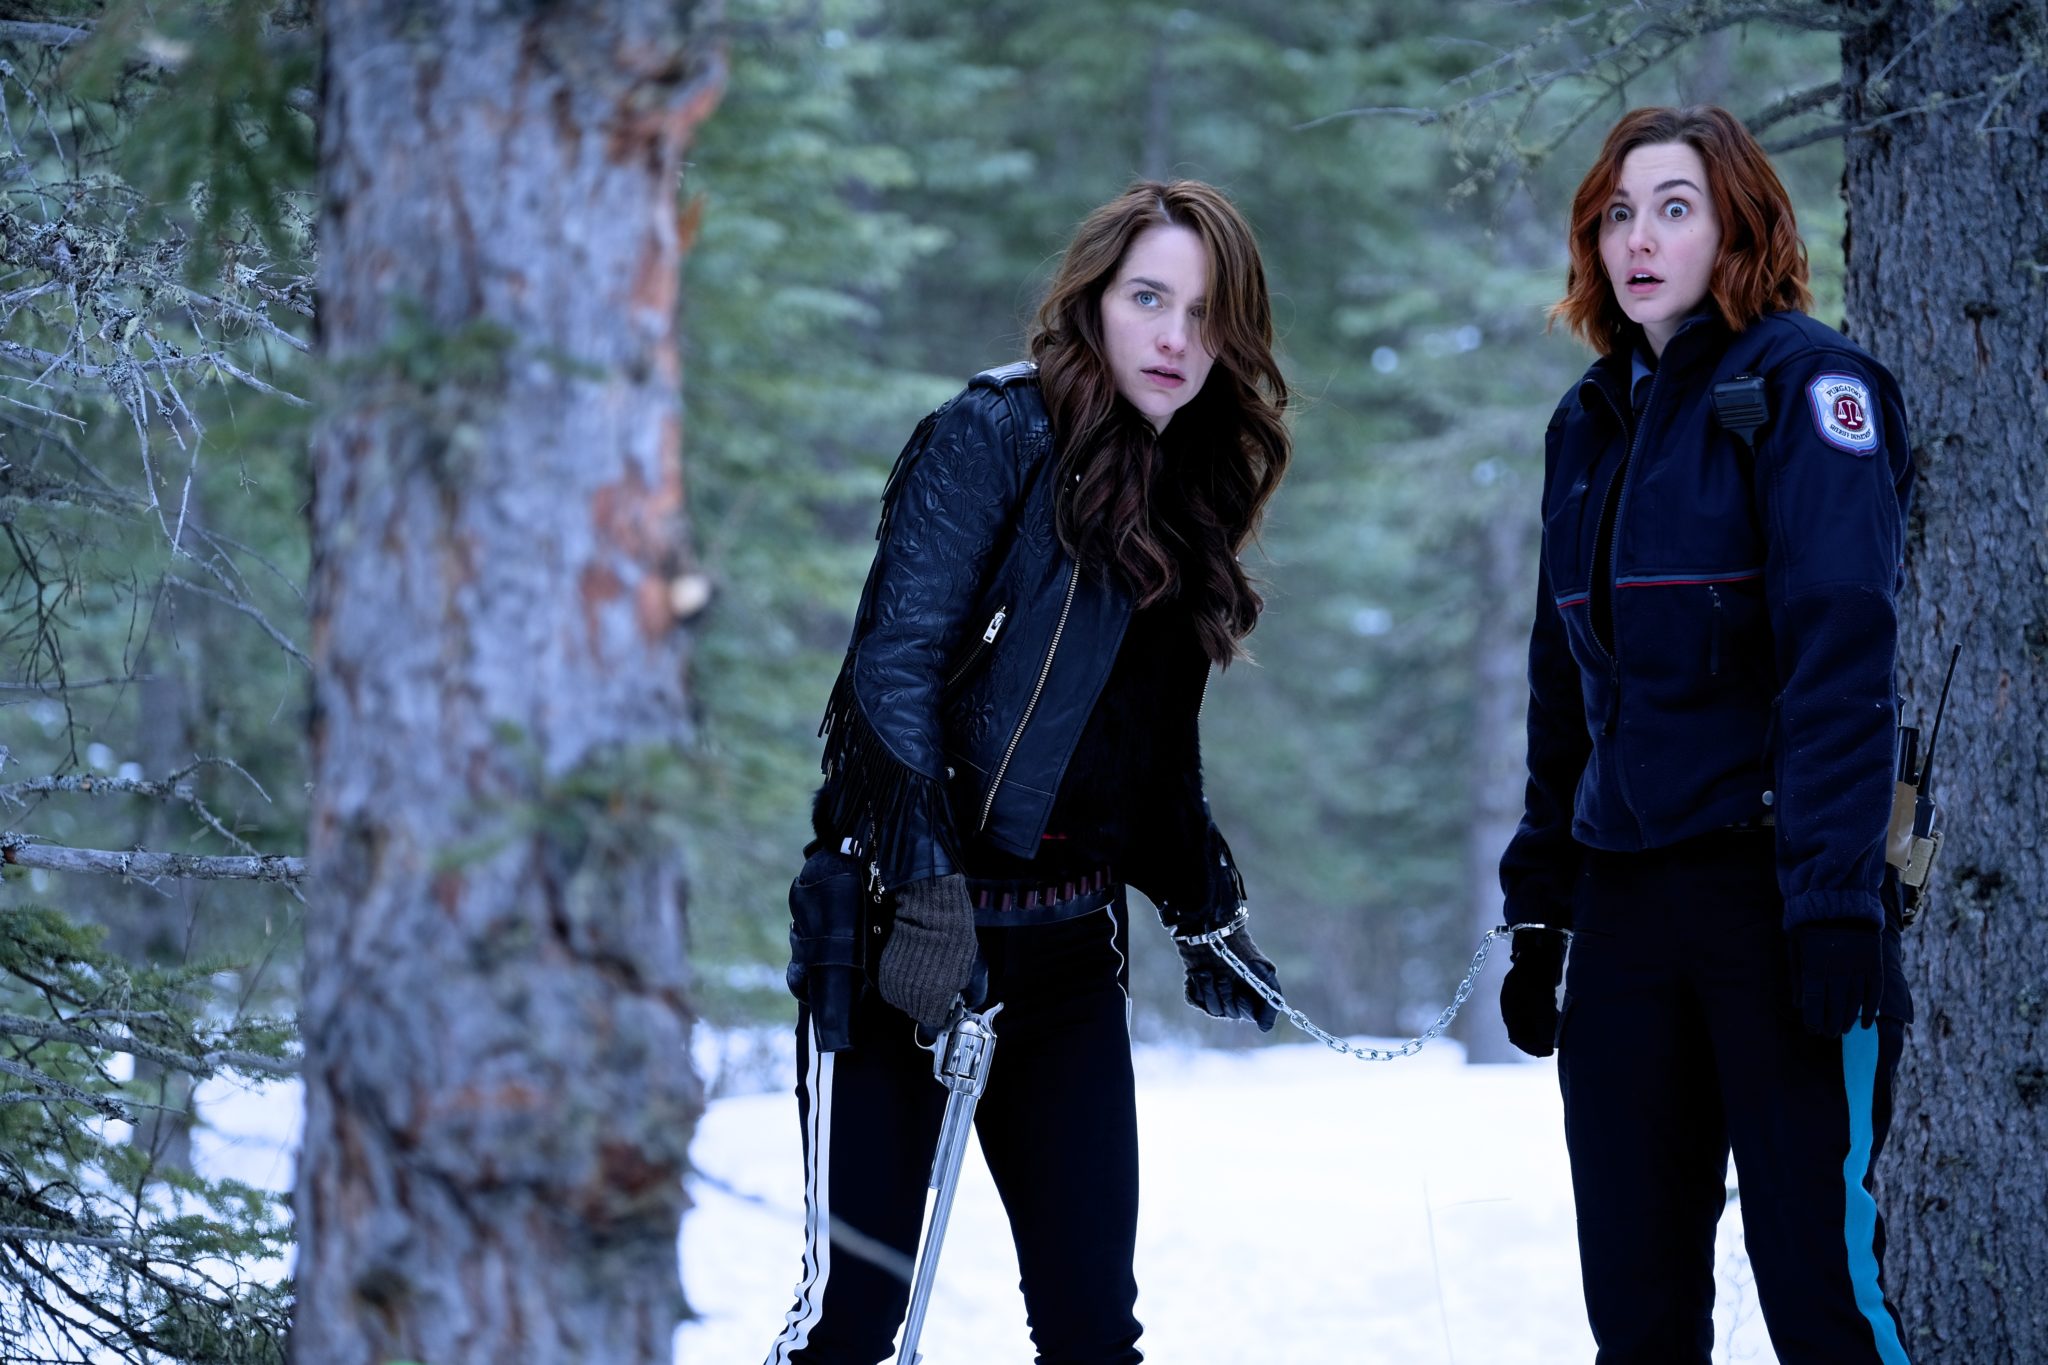 Wynonna and Nicole handcuffed together in the woods.